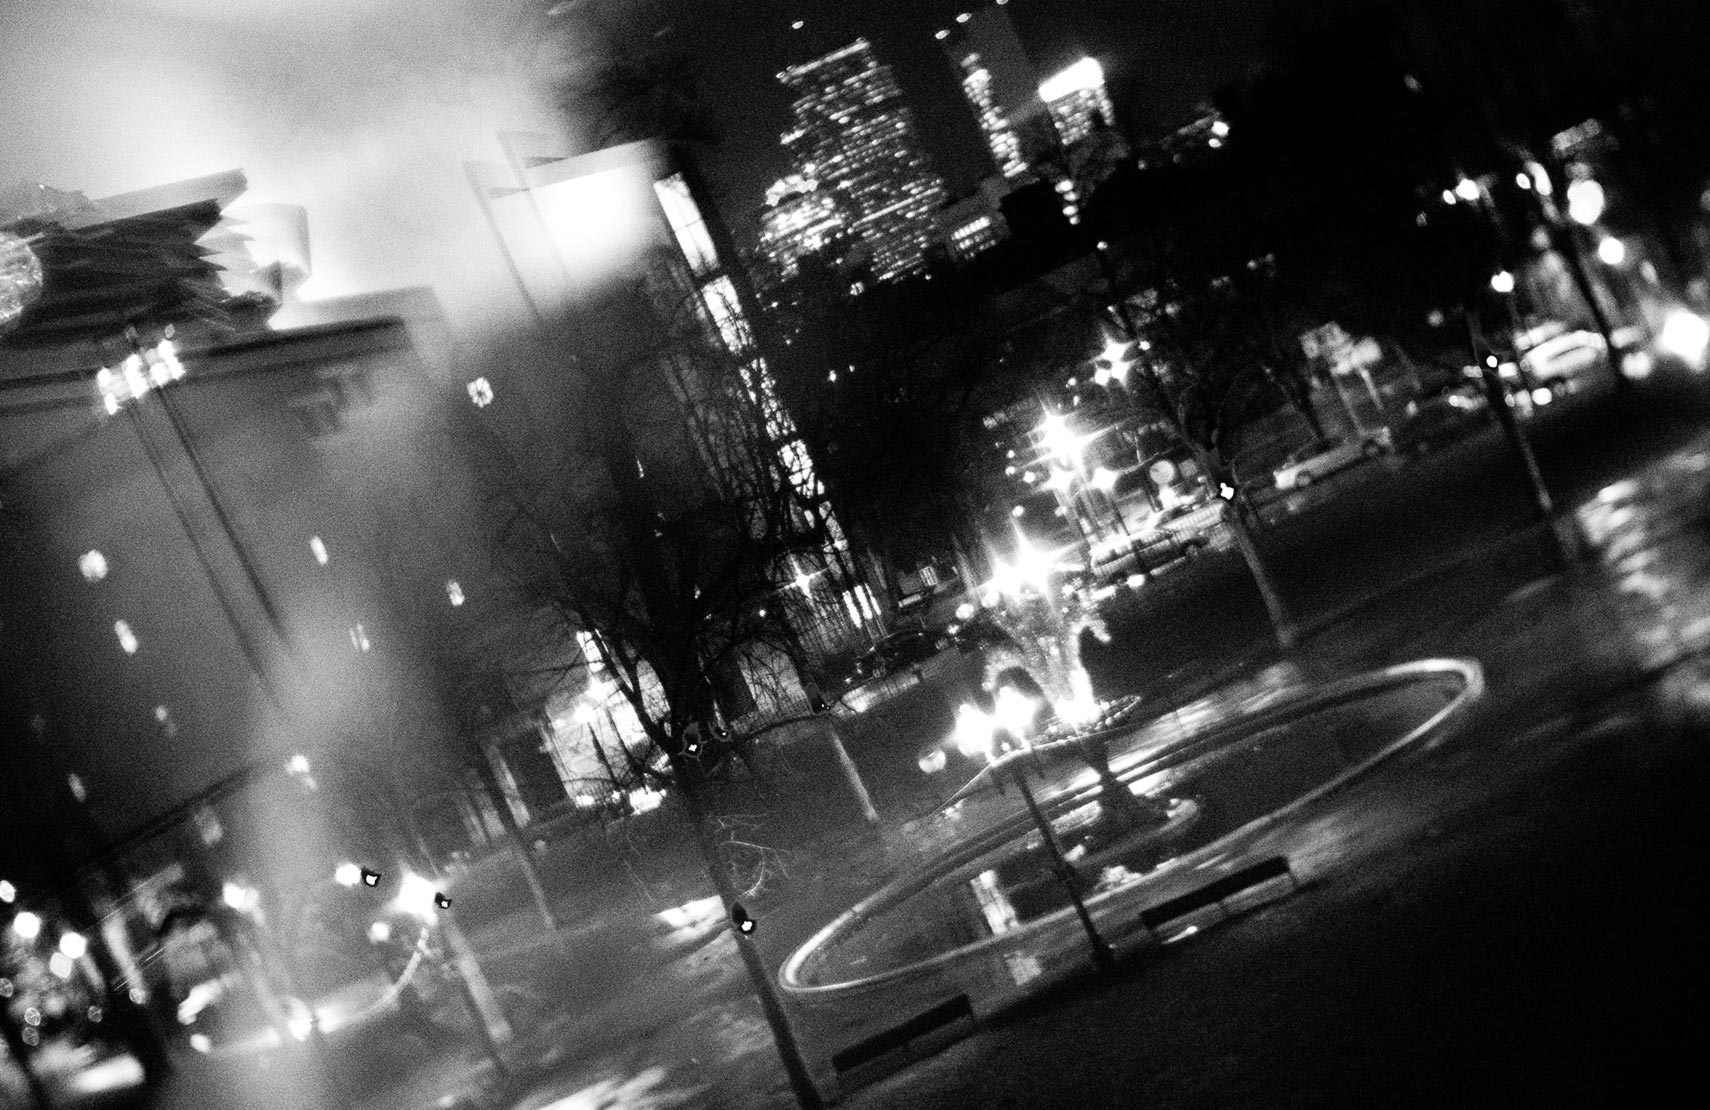 View of Blackstone Square at night from Sametz Blackstone Associates in black and white